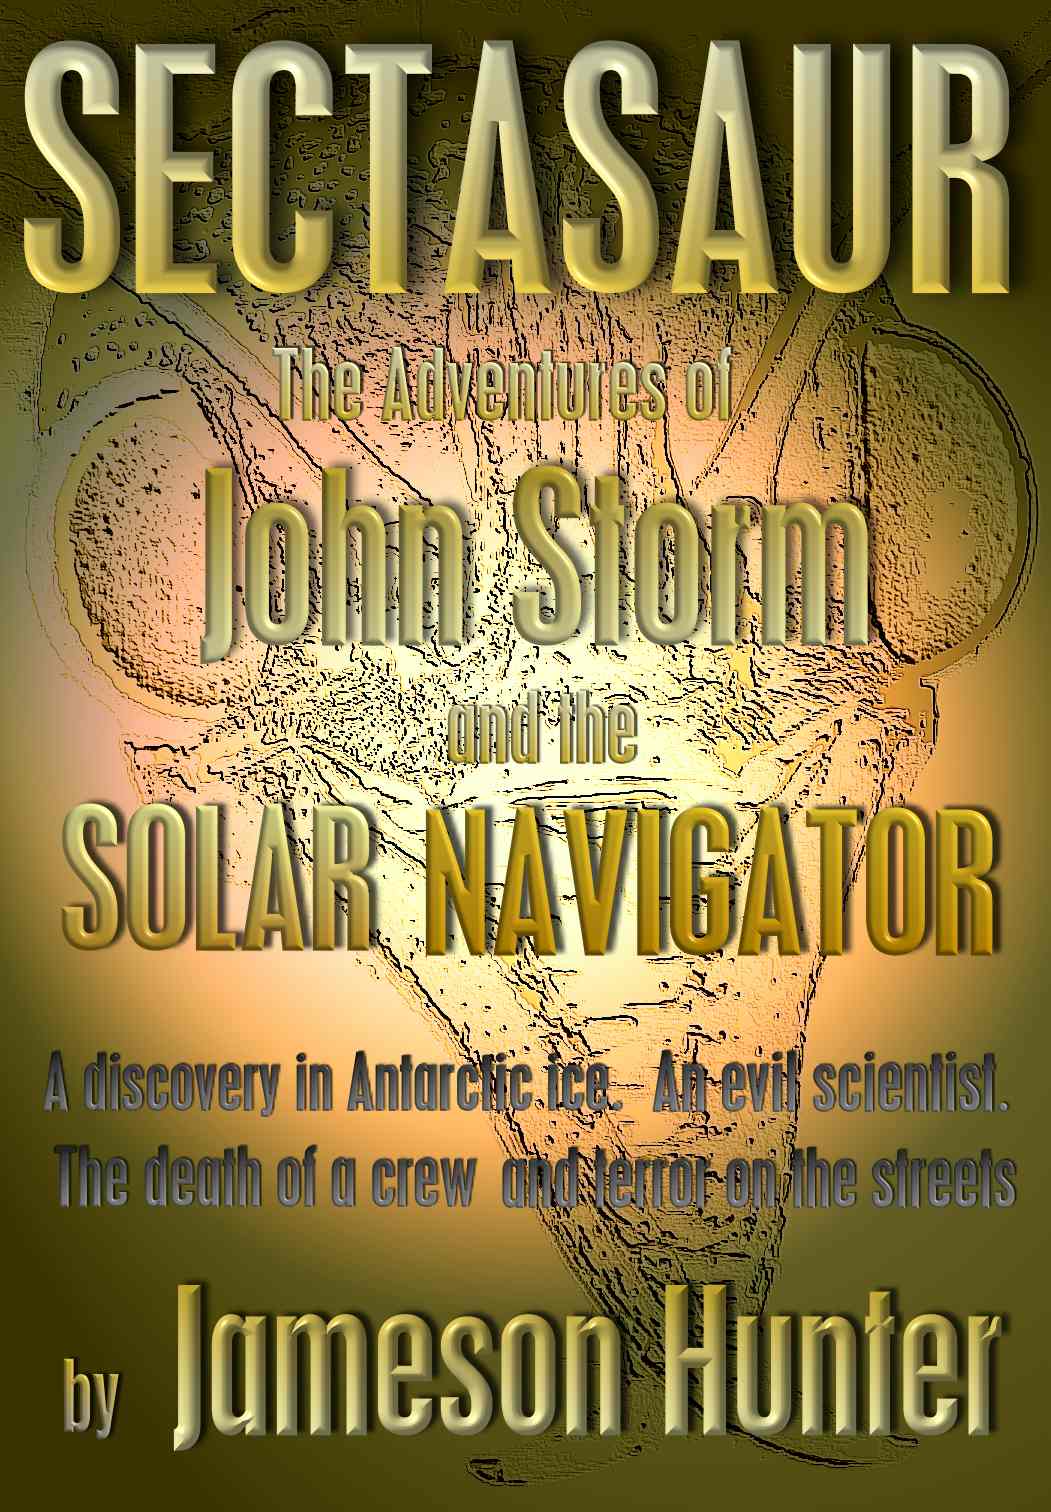 Sectasaur is an original science fiction story from the Scottish writer Jameson Hunter